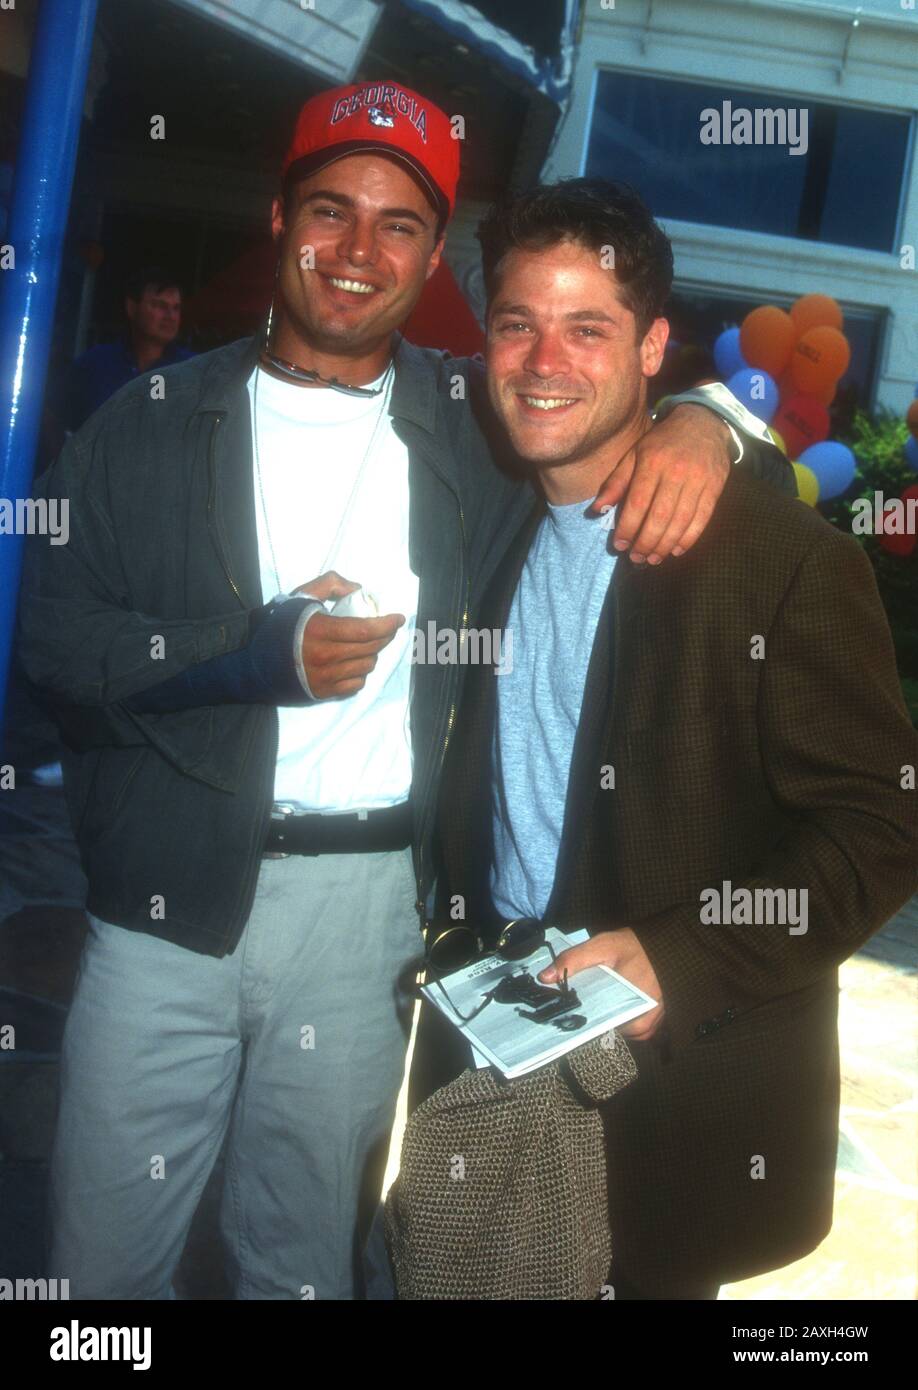 Westwood, California, USa 9th July 1995 Actor Matt Borlenghi and actor David Barry Gray attend Warner Bros. Pictures' 'Free Willy 2: The Adventure Home' Premiere on July 9, 1995 at Mann Village Theatre in Westwood, California, USA. Photo by Barry King/Alamy Stock Photo Stock Photo